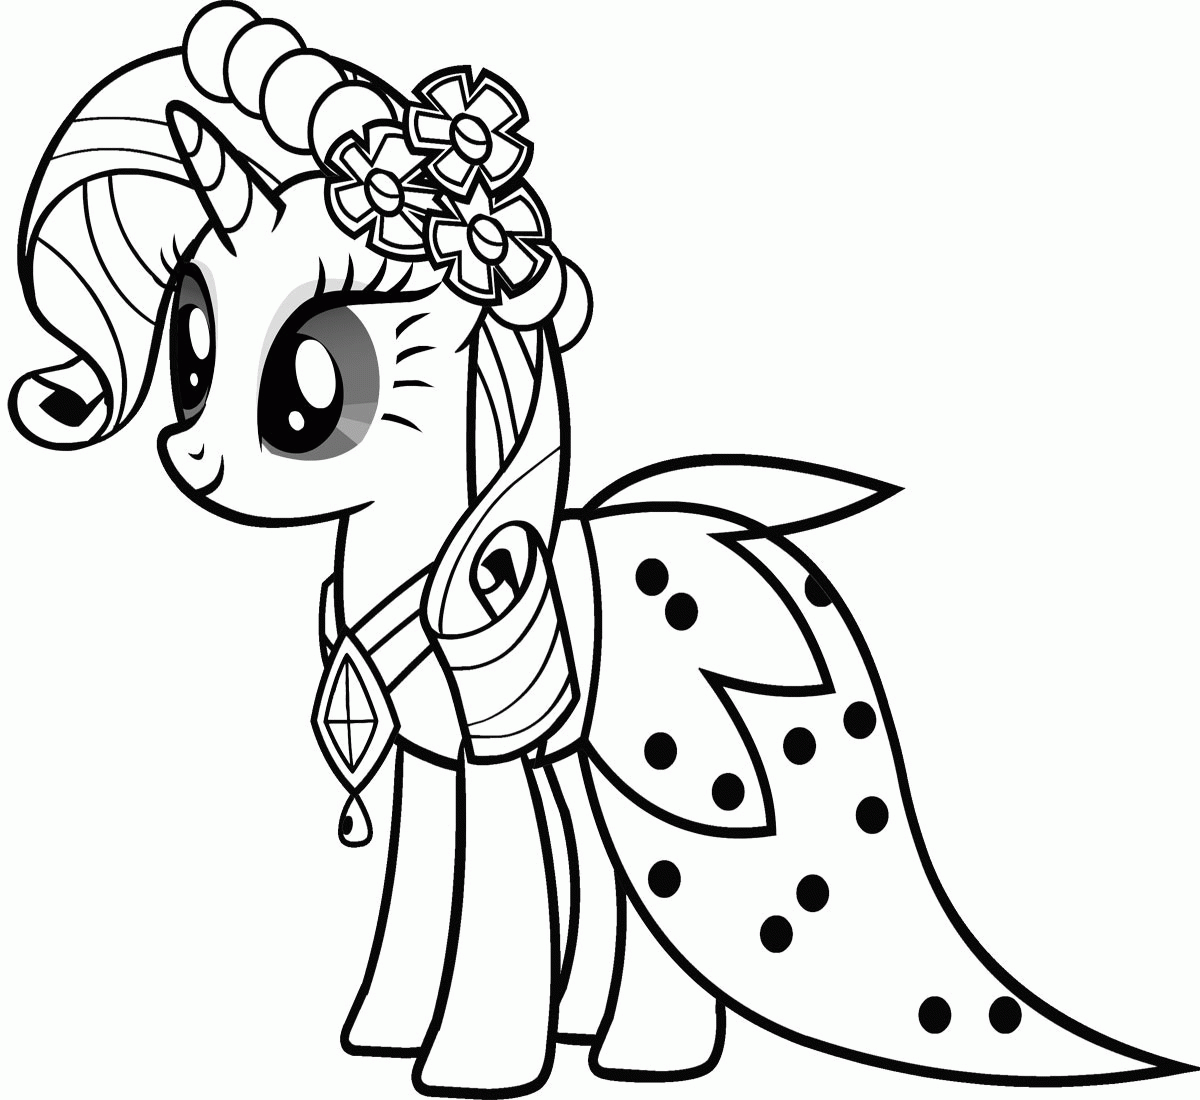 20 Pics Of My Little Pony Unicorn Coloring Pages   Cute My Little ...